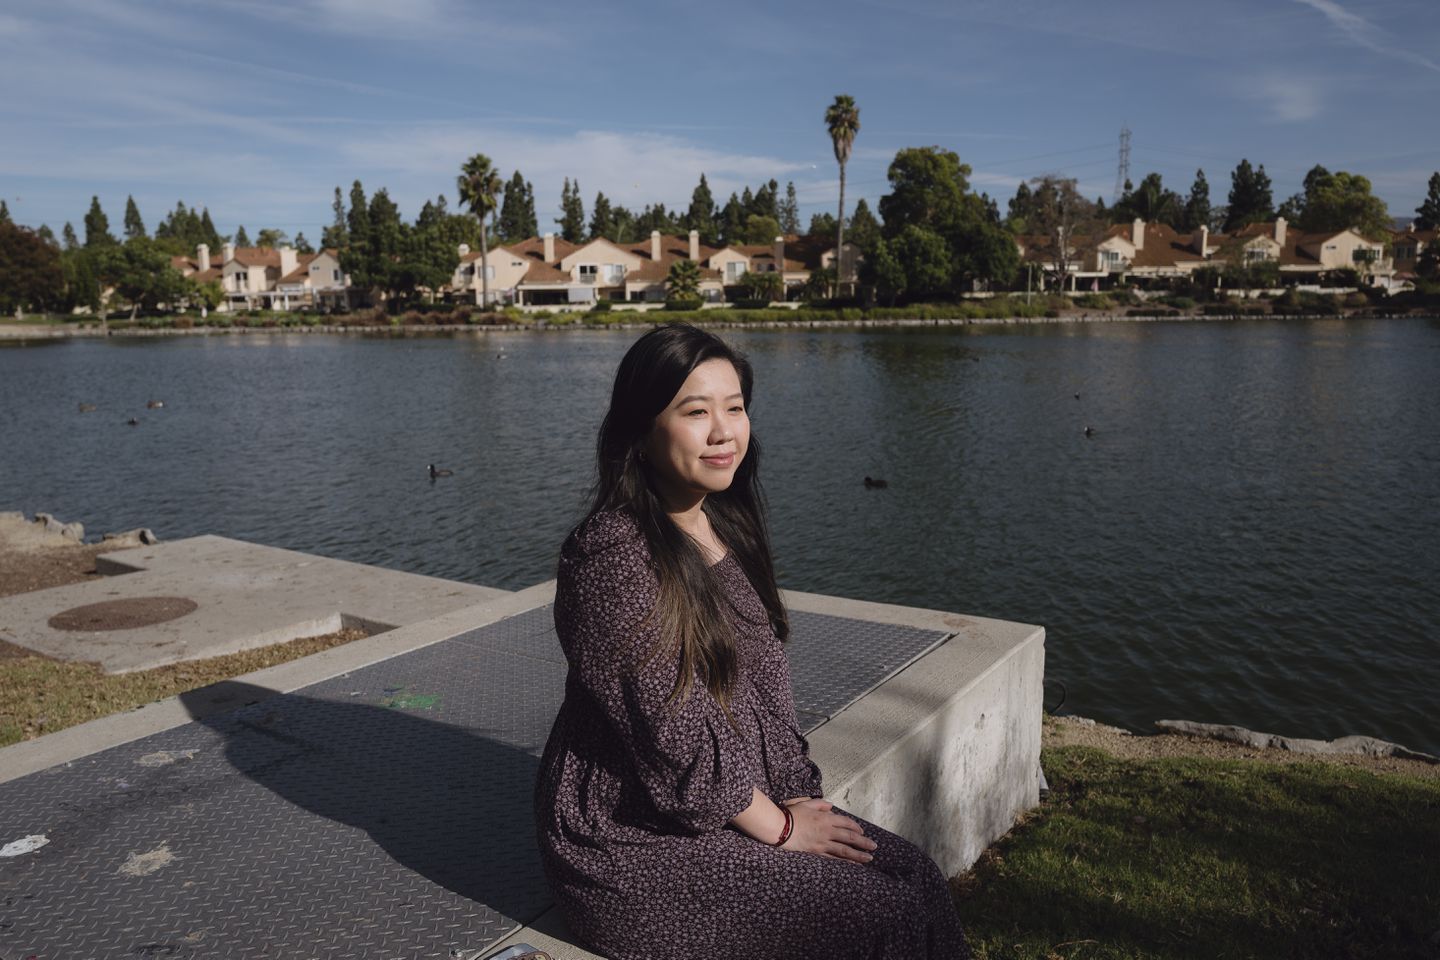 Linda Lee Garibay at a park in Chula Vista, California. Lee Garibay is a project specialist for the San Diego County education office who books free short-term hotel stays for families.